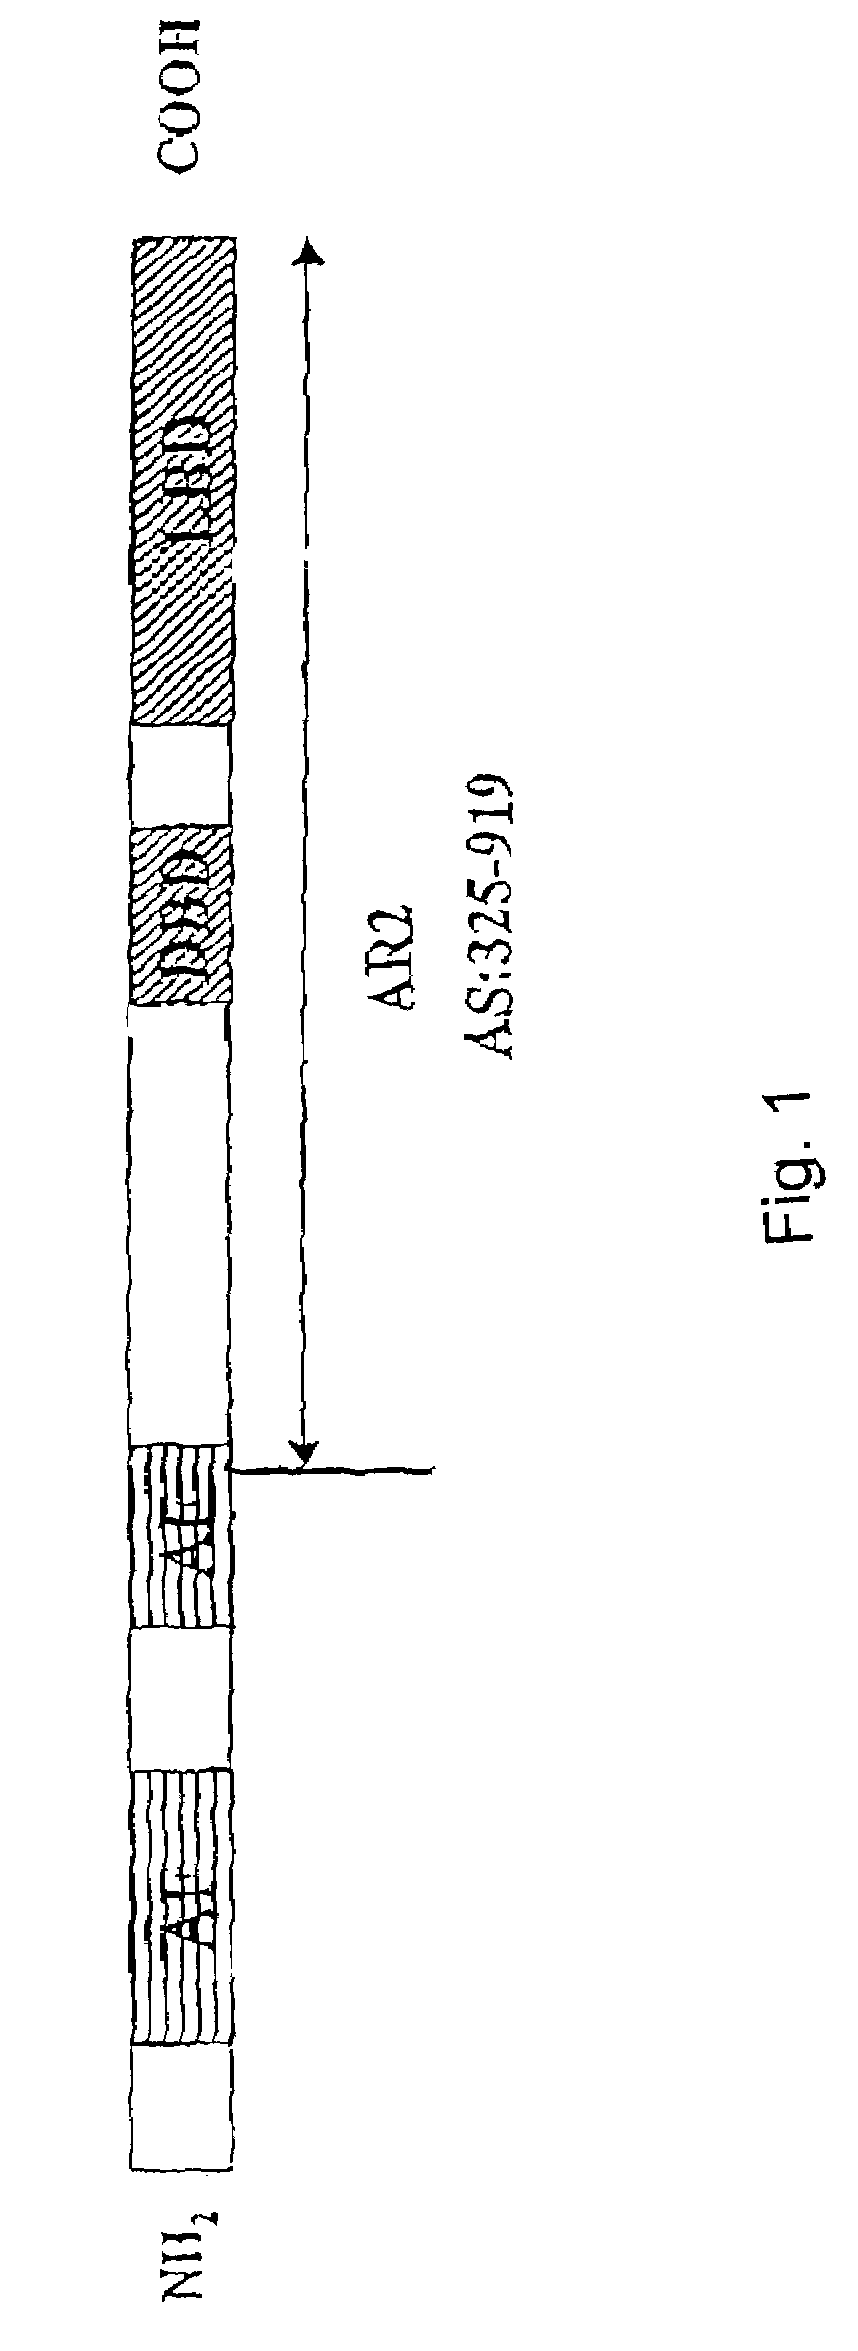 Method for testing hormonal effects of substances